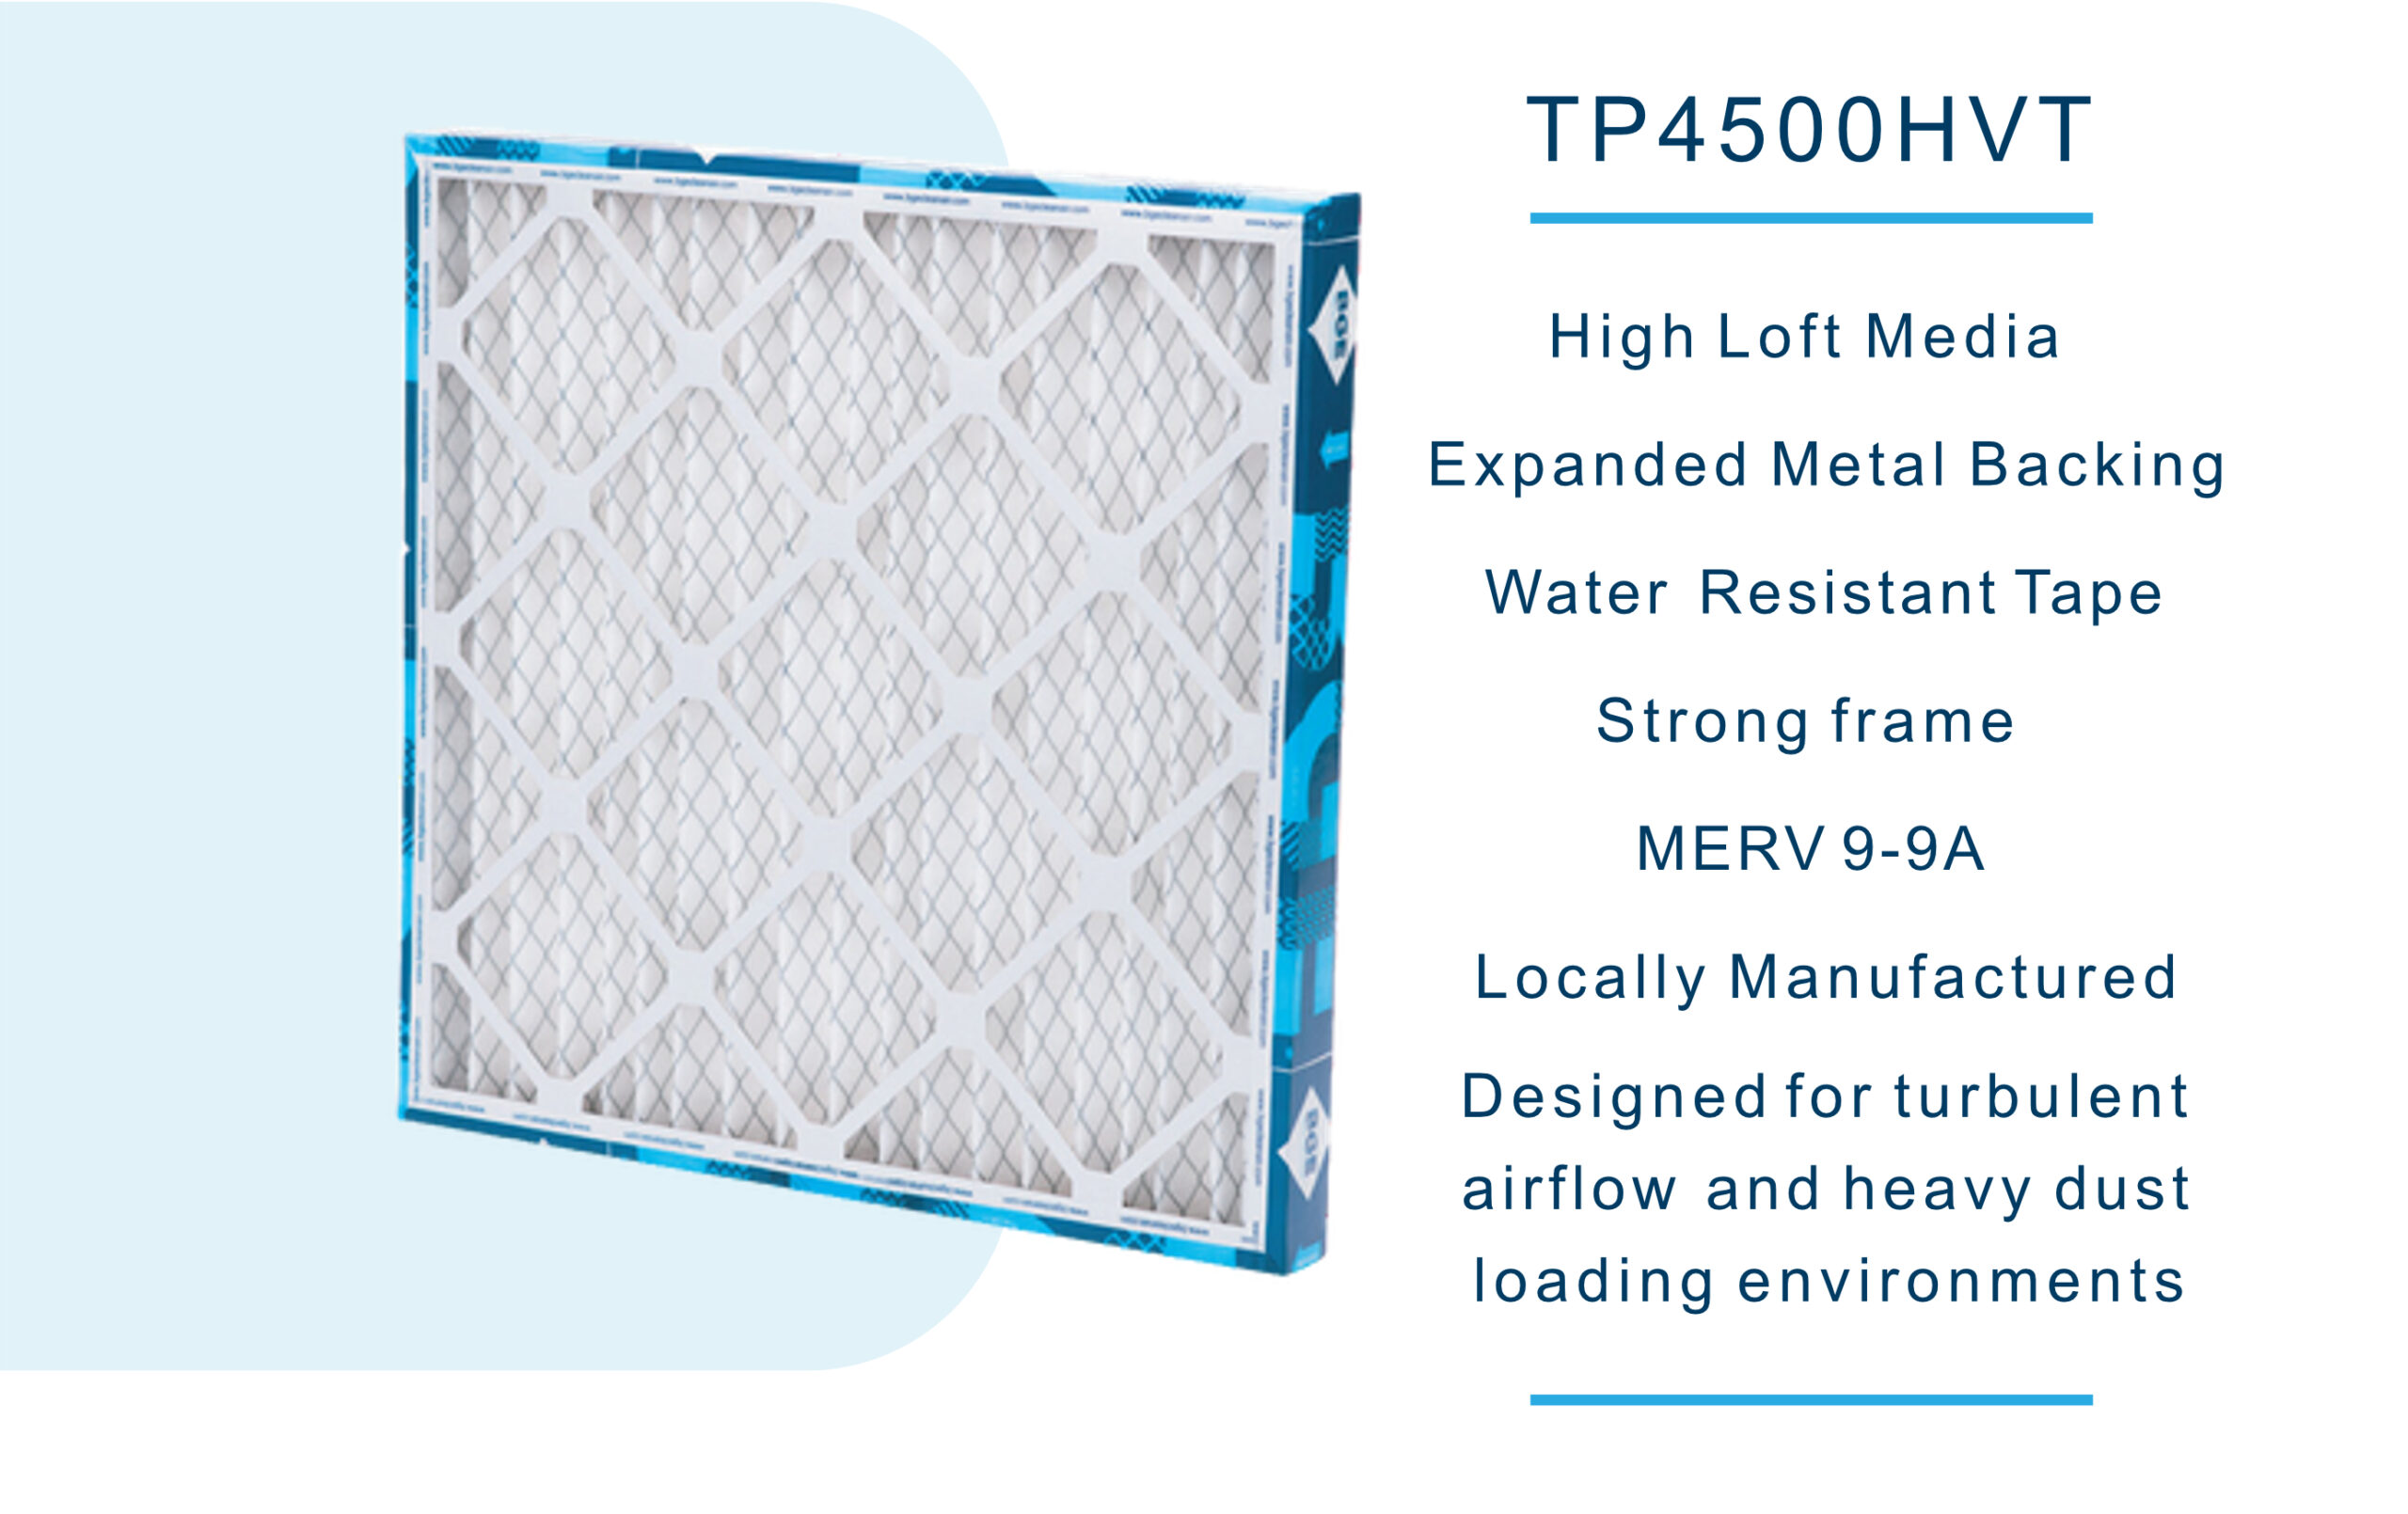 TP4500HVT High Loft Media Water Resistant Tape Expanded Metal Backing MERV 9-9A Strong frame Locally Manufactured Designed for turbulent airflow and heavy dust loading environments